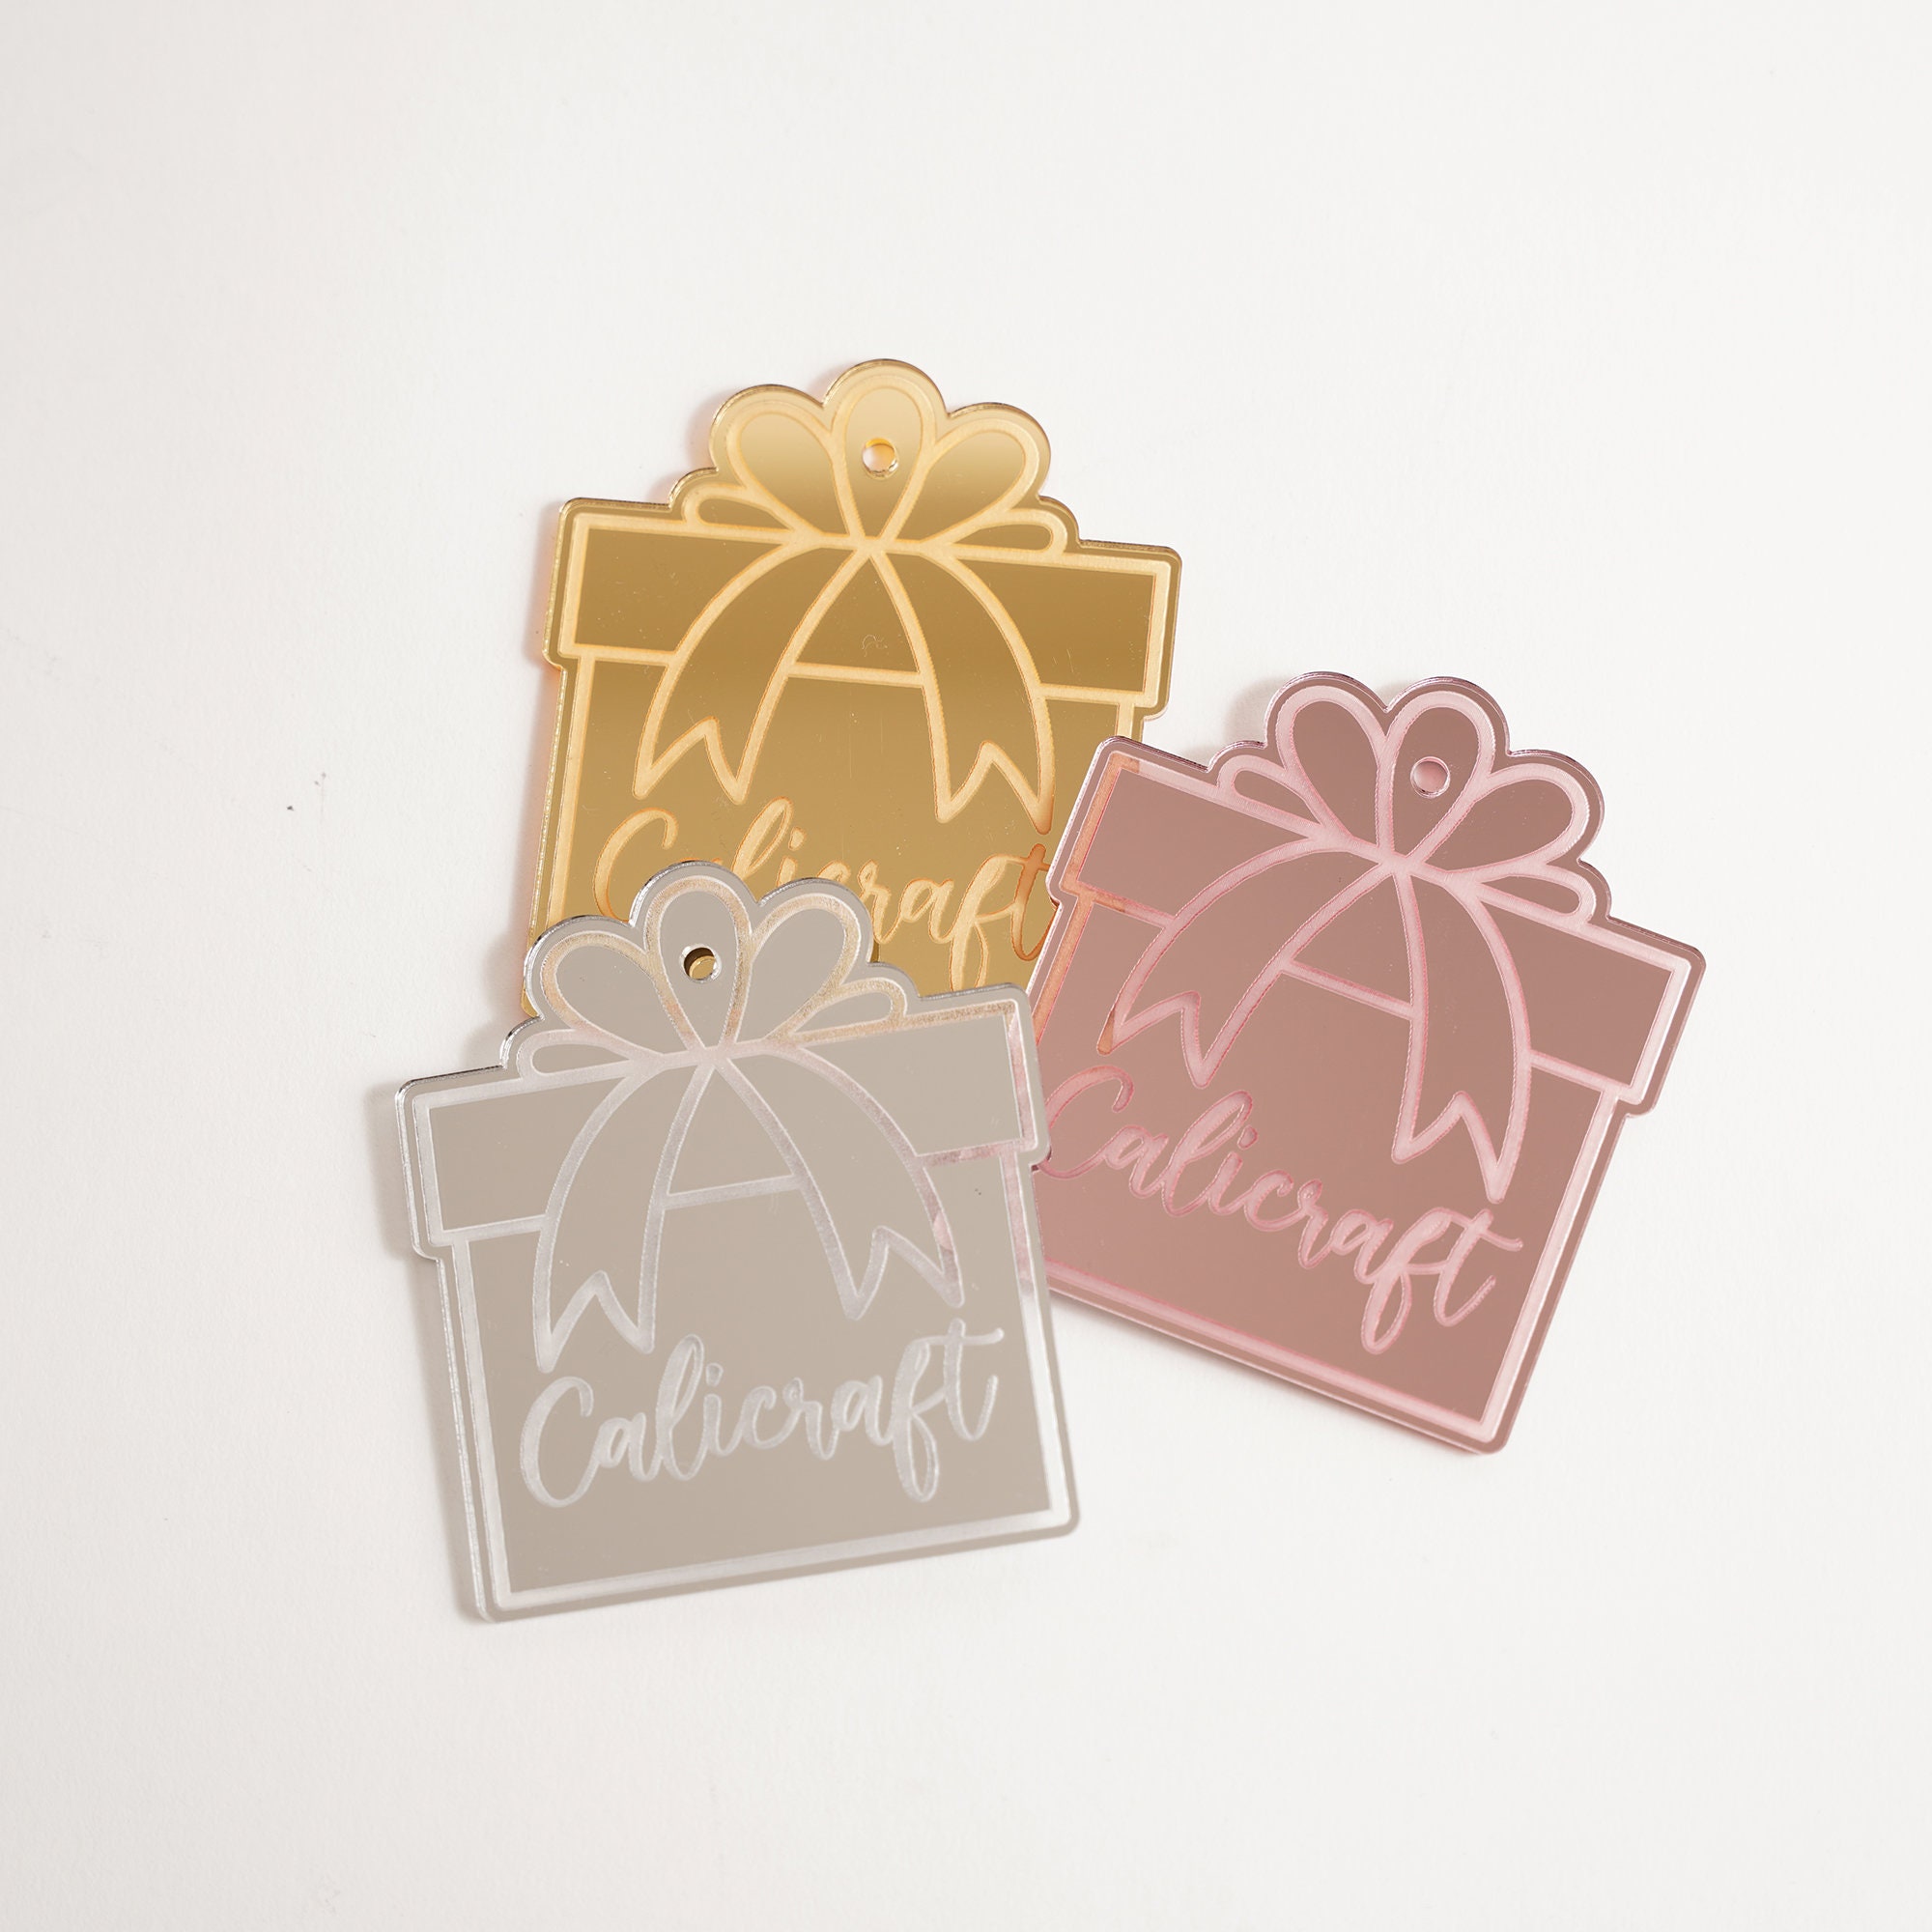 Cheers! Acrylic Gift Tags - Set of 10 – Etch Effect